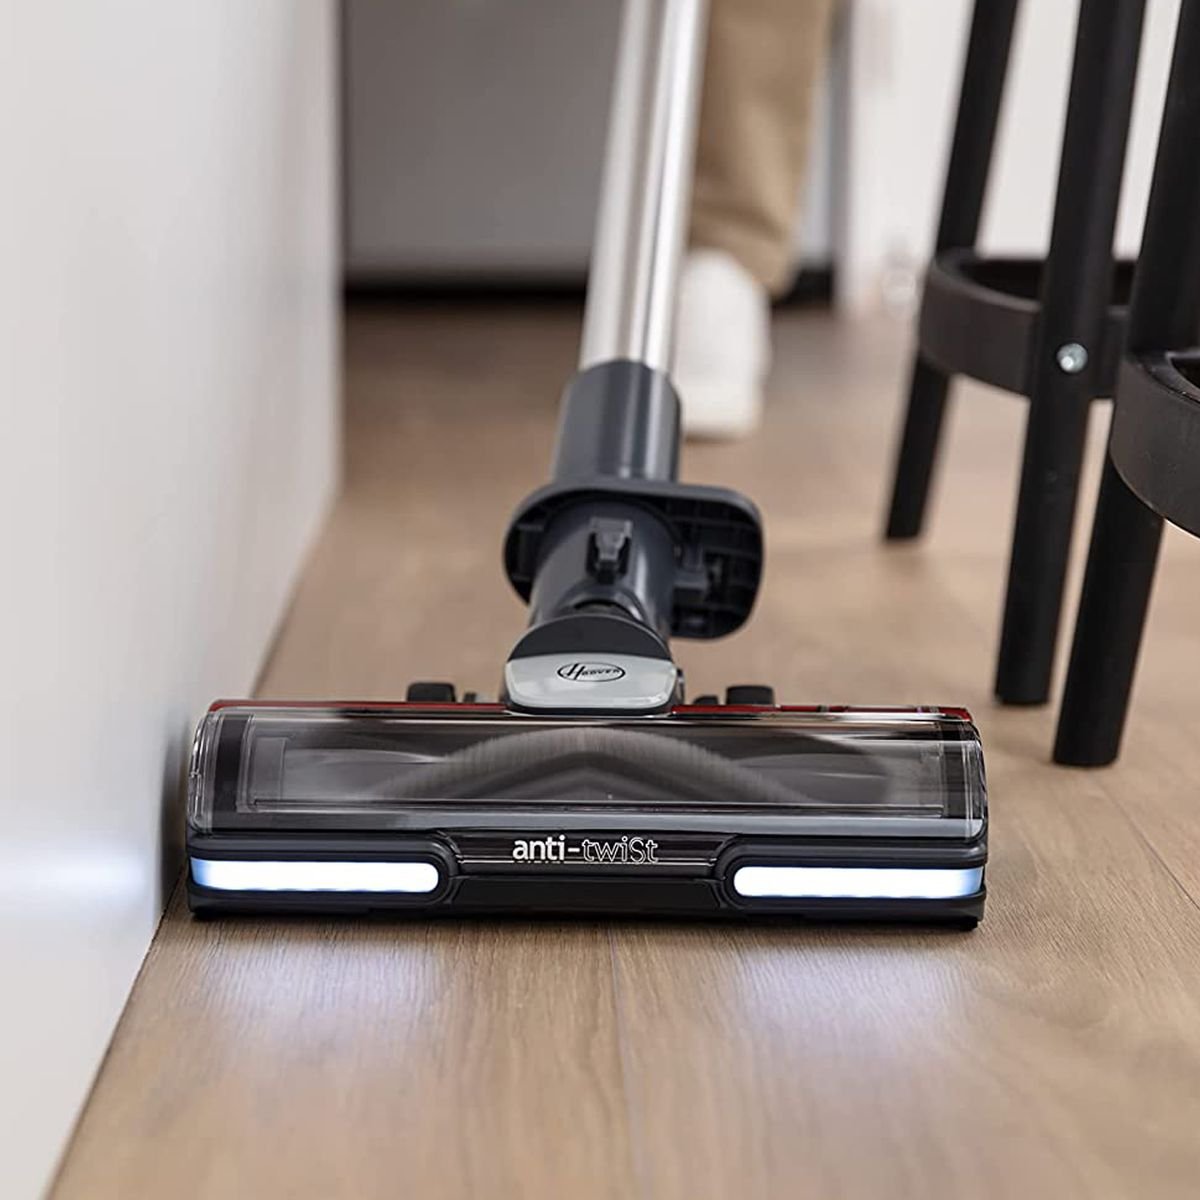 Hoover HF9 cordless vacuum review